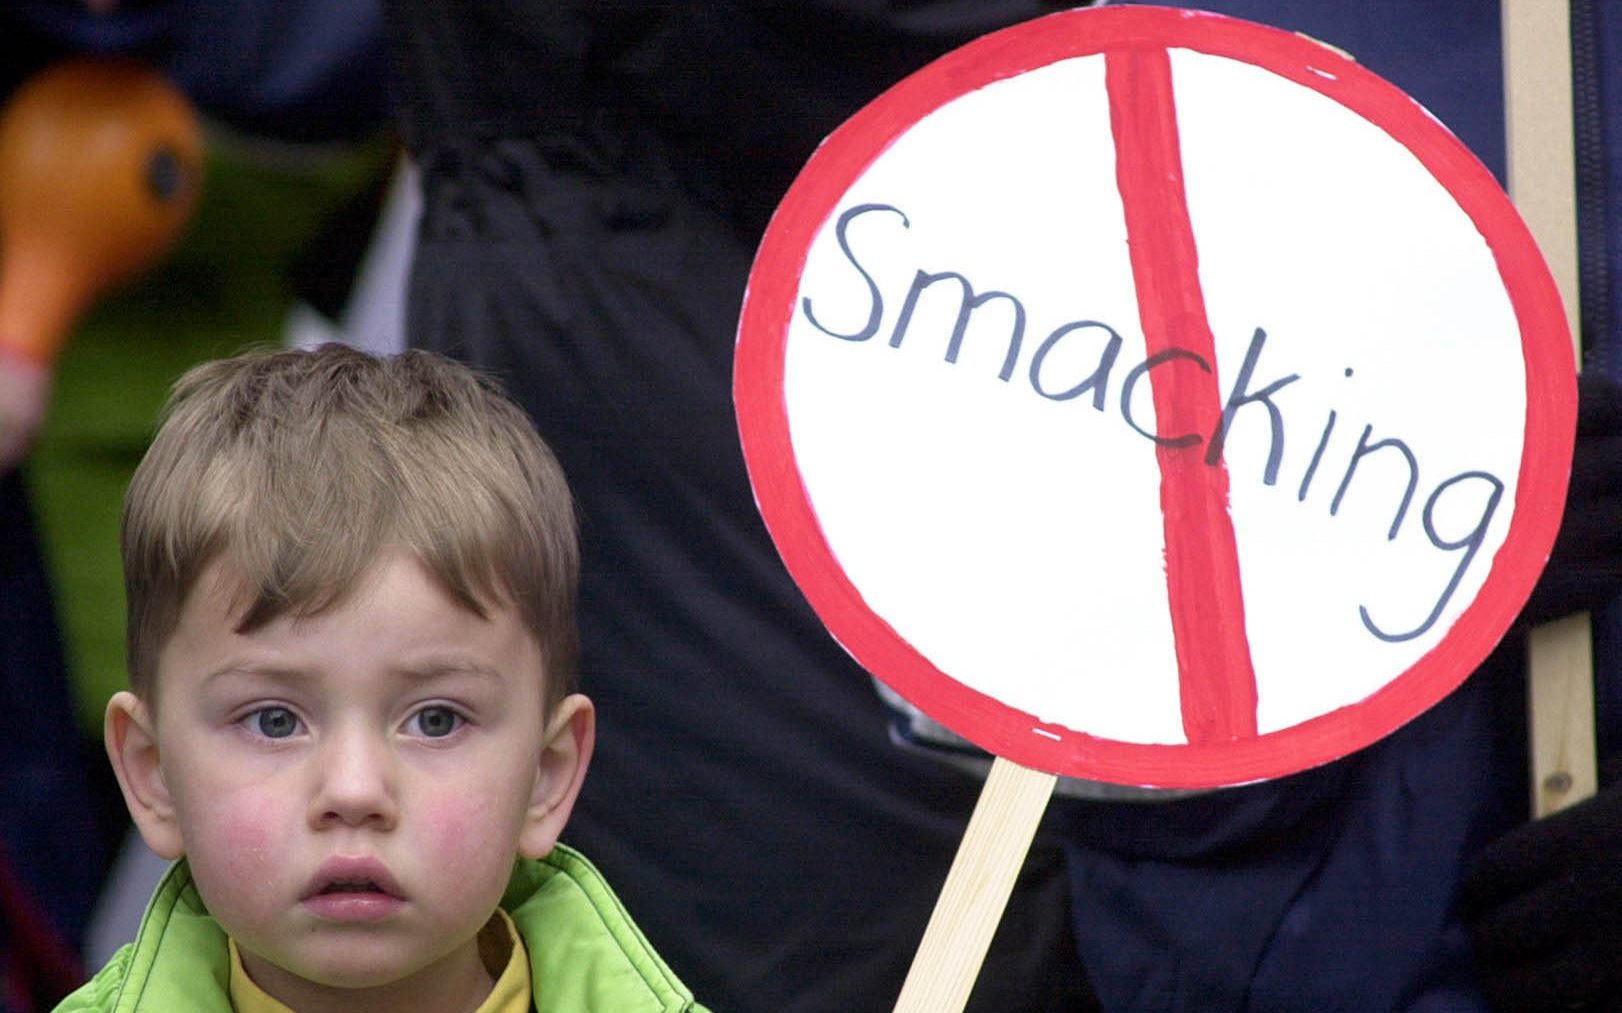 paediatricians call for total ban on smacking